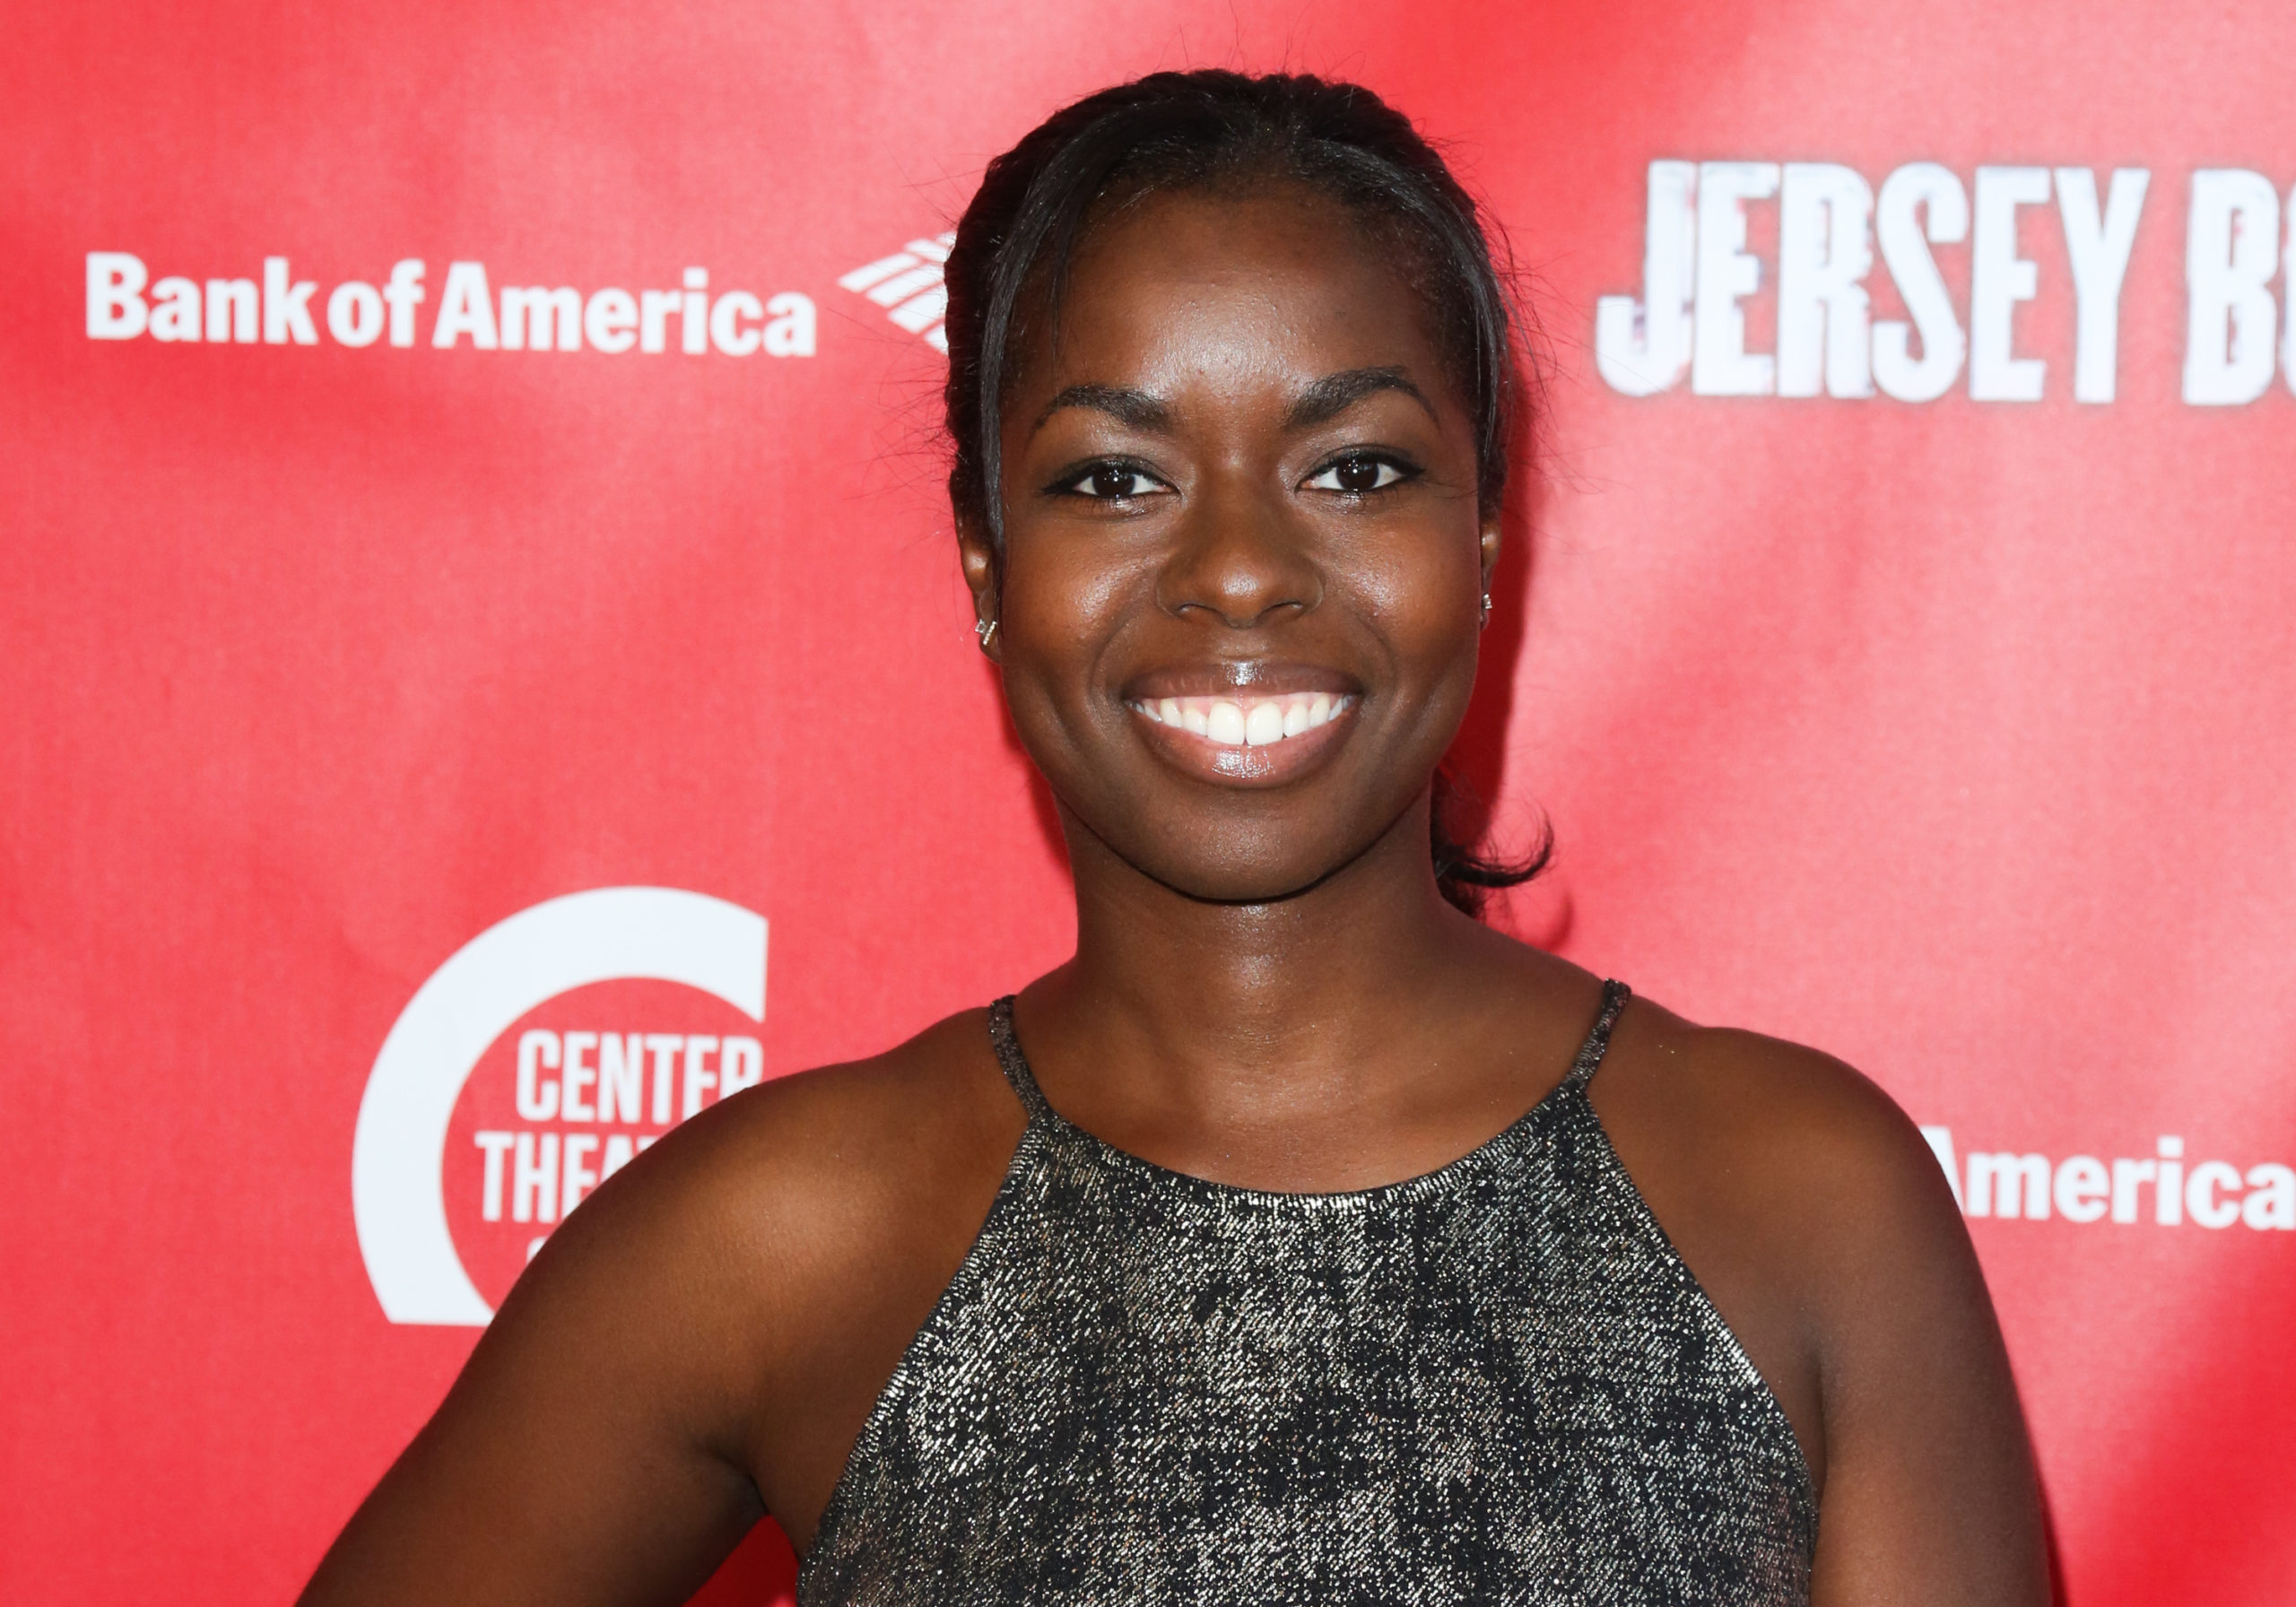 Camille Winbush Revealed on Social Media She Started an "Only Fans"